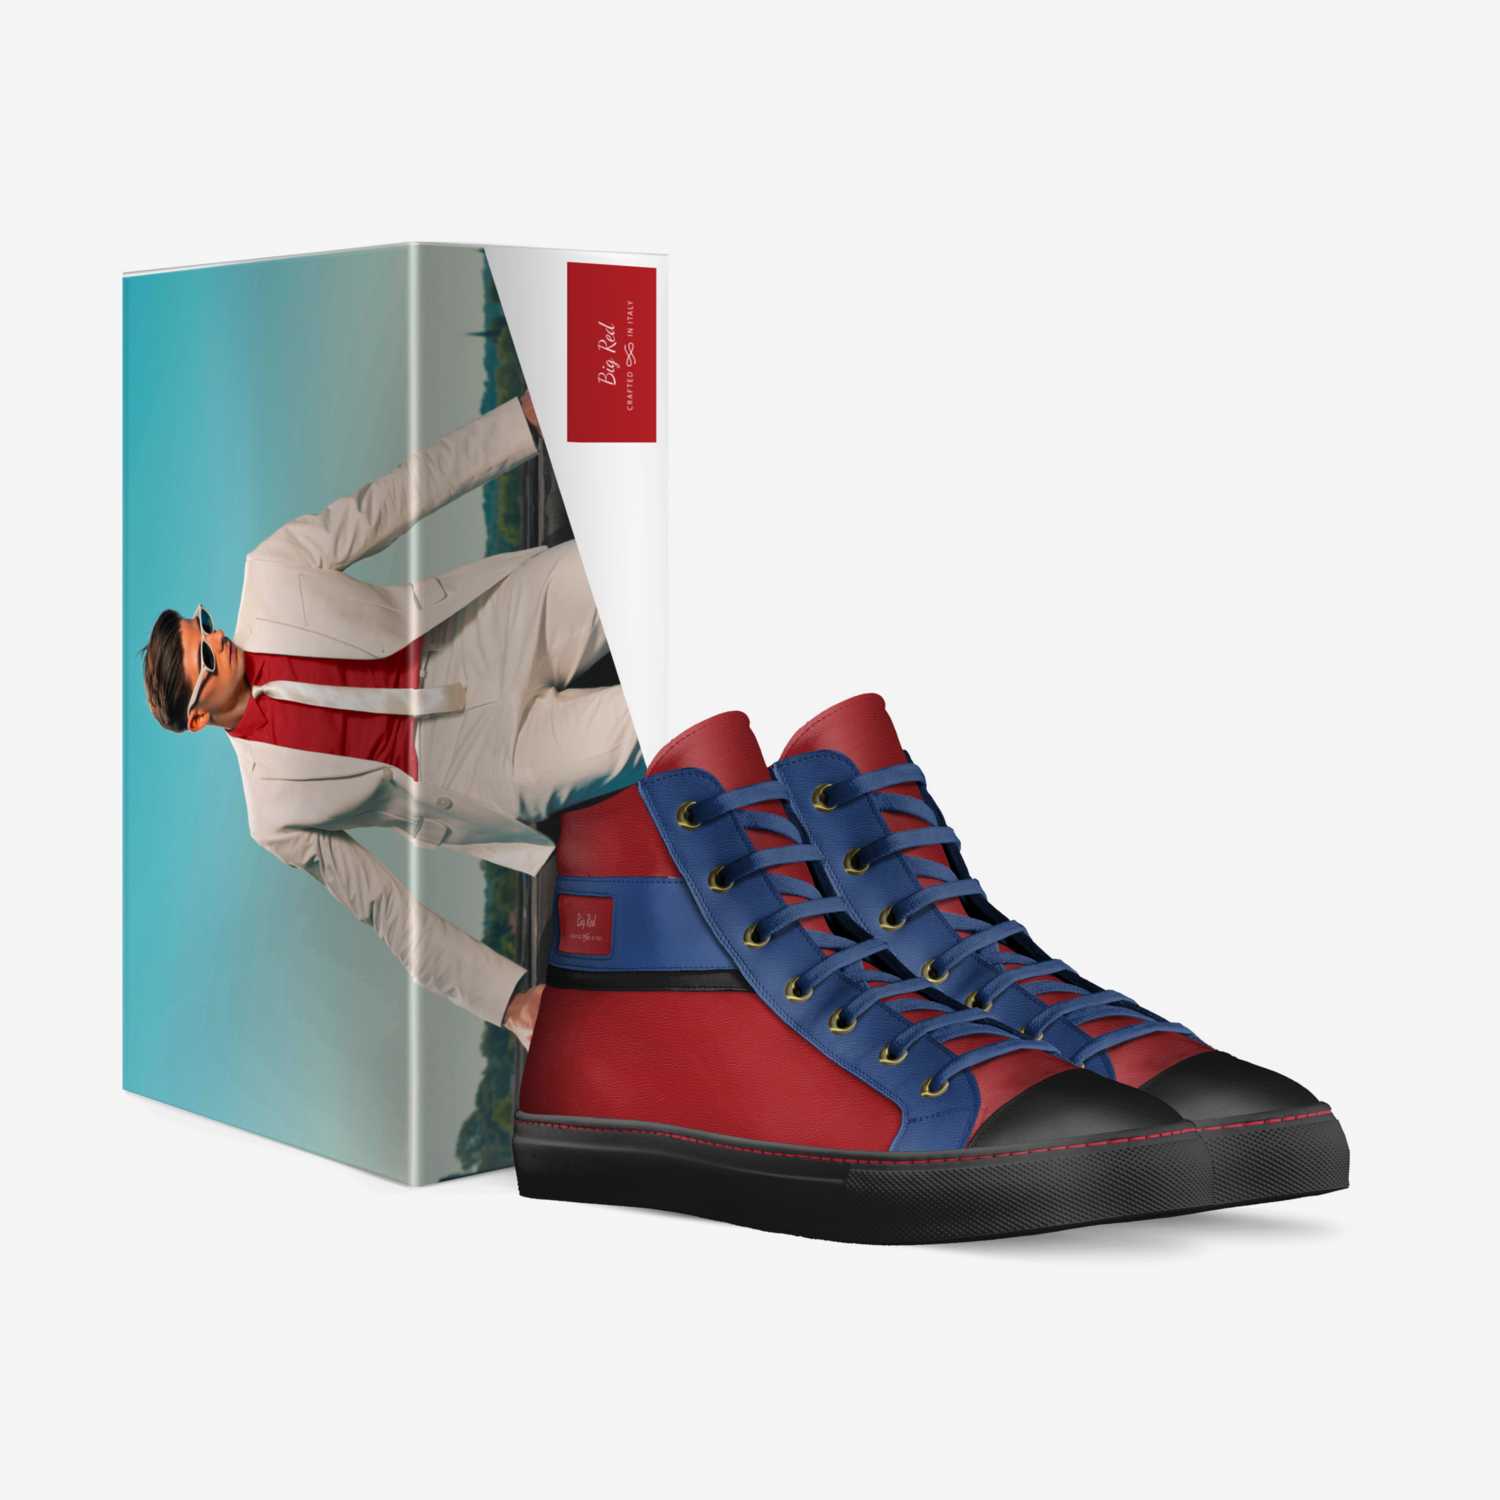 Big Red custom made in Italy shoes by Casey Hartsell | Box view